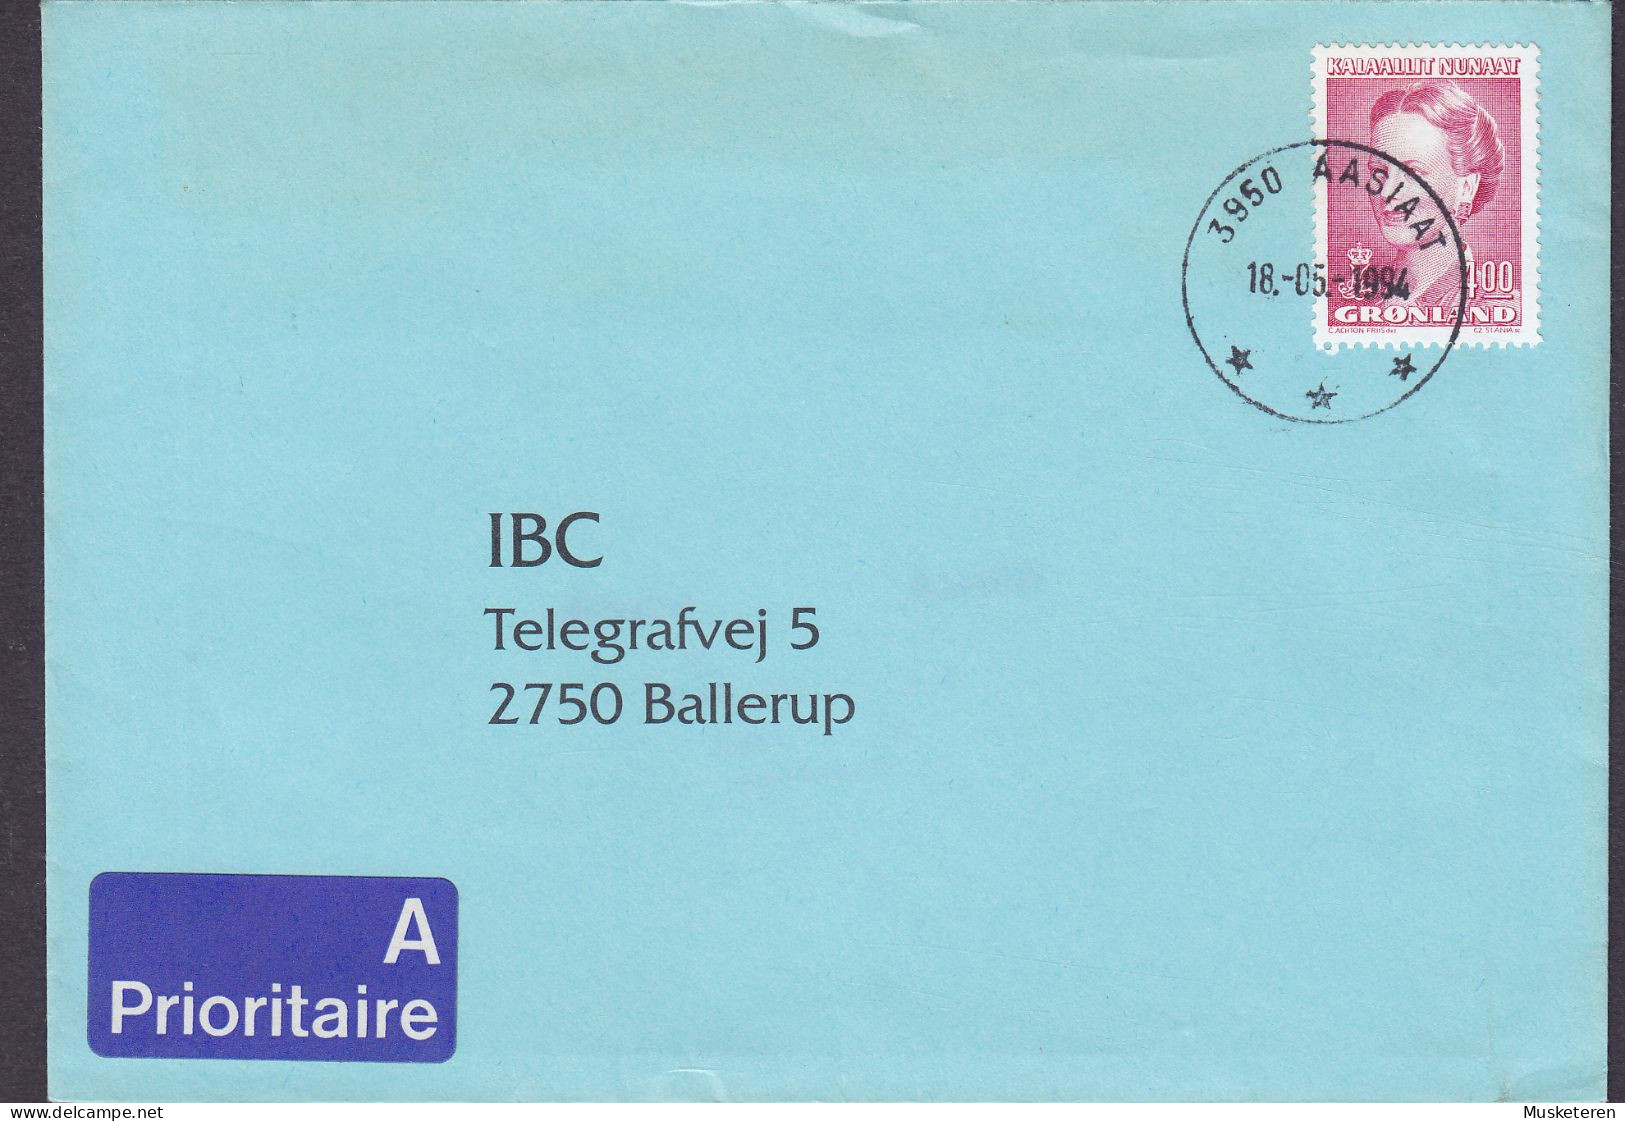 Greenland A PRIORITAIRE Label ASSIAAT 1994 Cover Brief Lettre BALLERUP Denmark Margrethe II. (Flour Paper) (Cz. Slania) - Covers & Documents